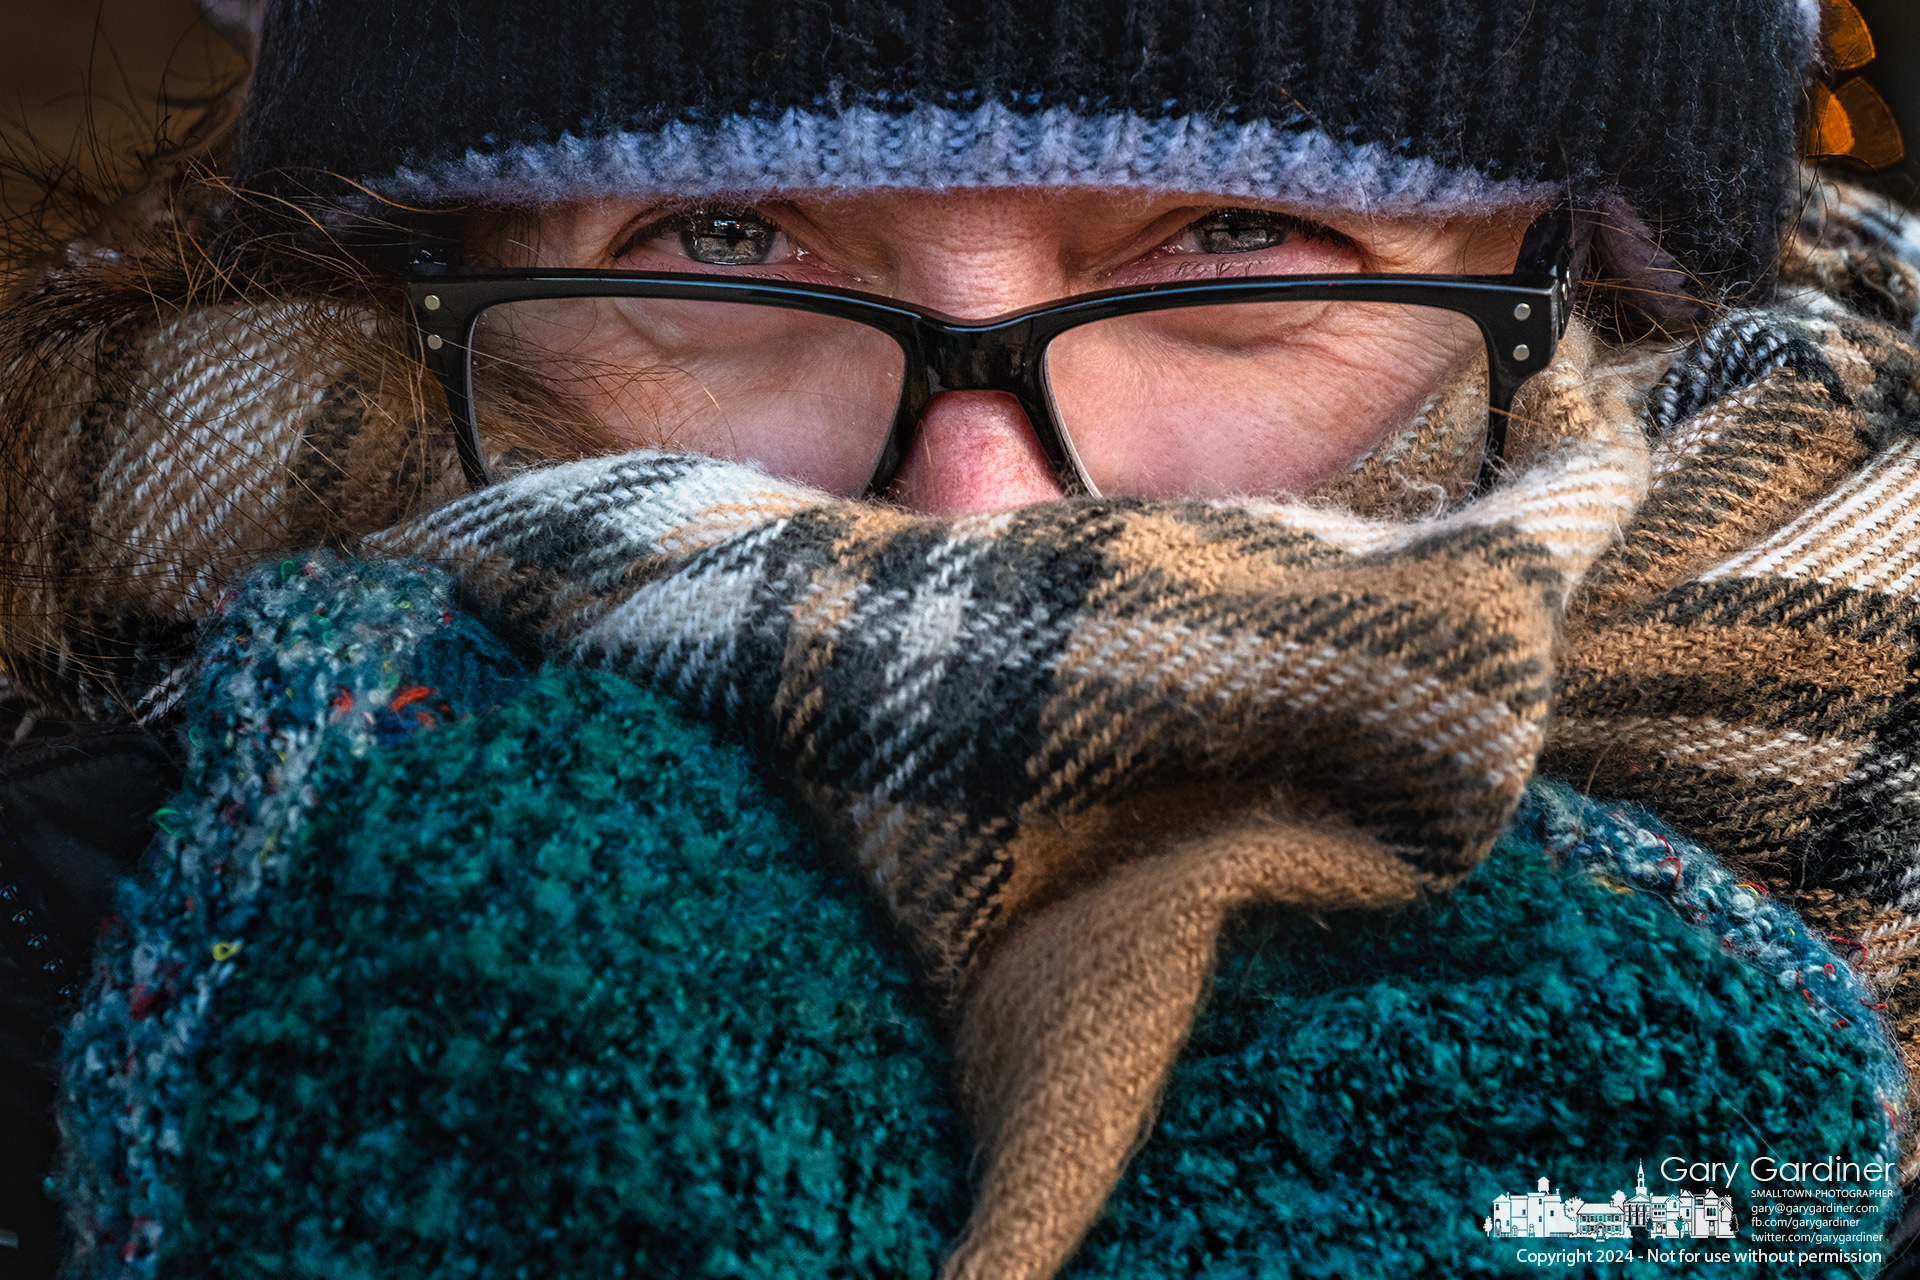 A shopper uses her mittened hands to hold a woolen scarf over her face as she exits a store in Uptown Westerville on a windy and cold winter afternoon. My Final Photo for January 17, 2024.